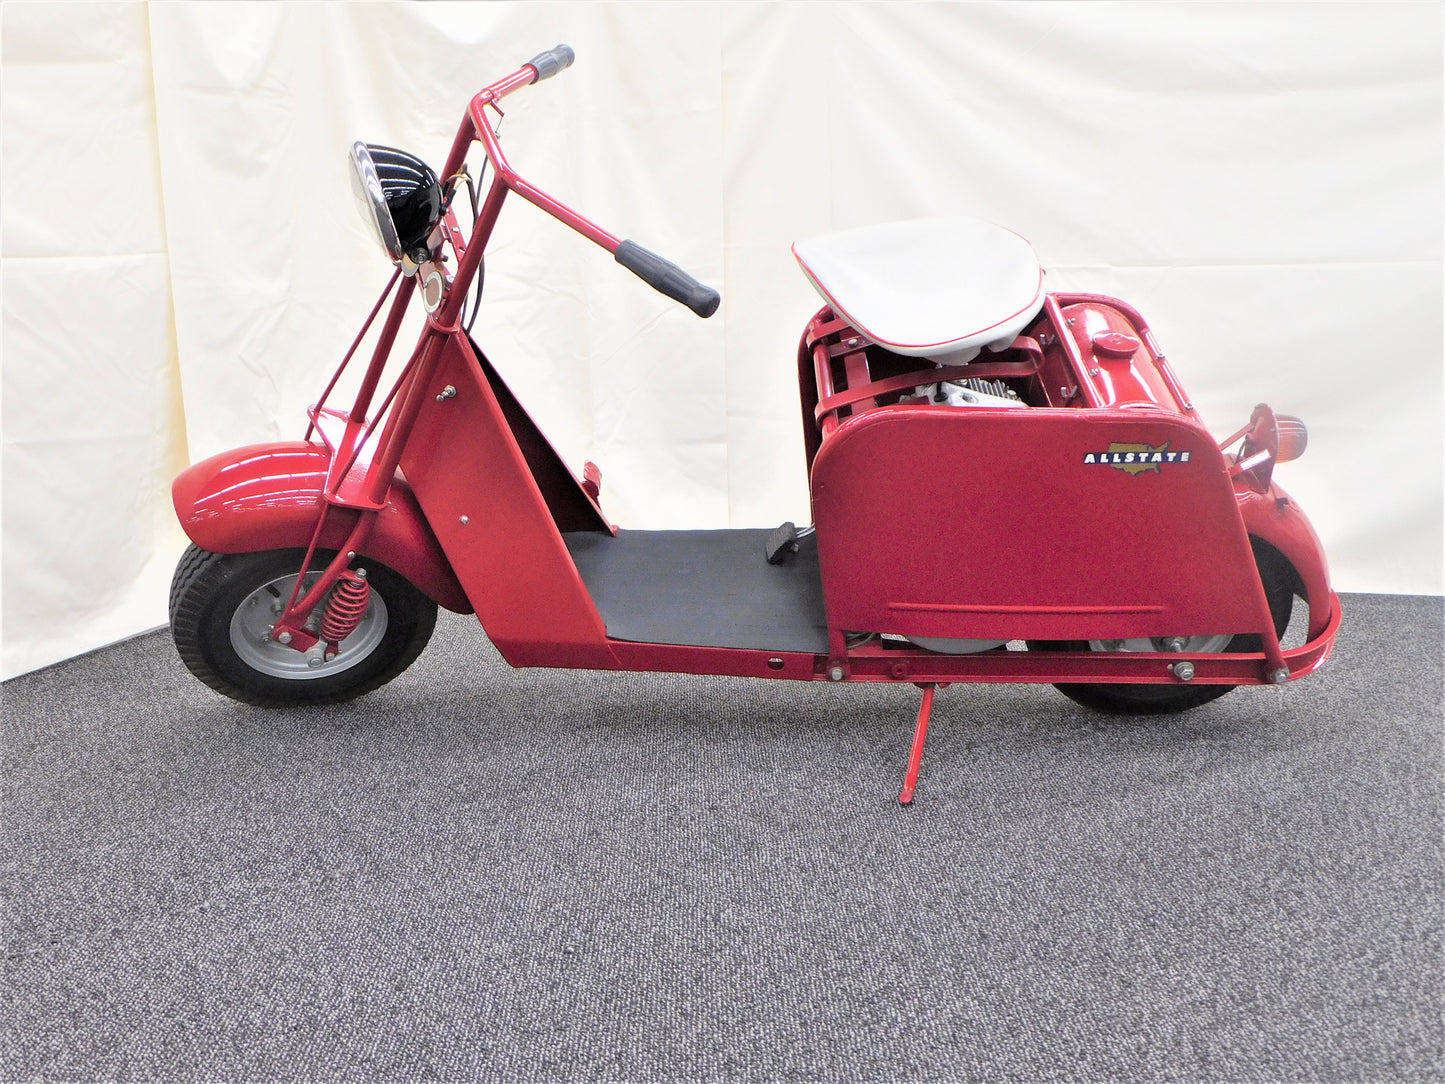 1951 Allstate 811.30 Scooter